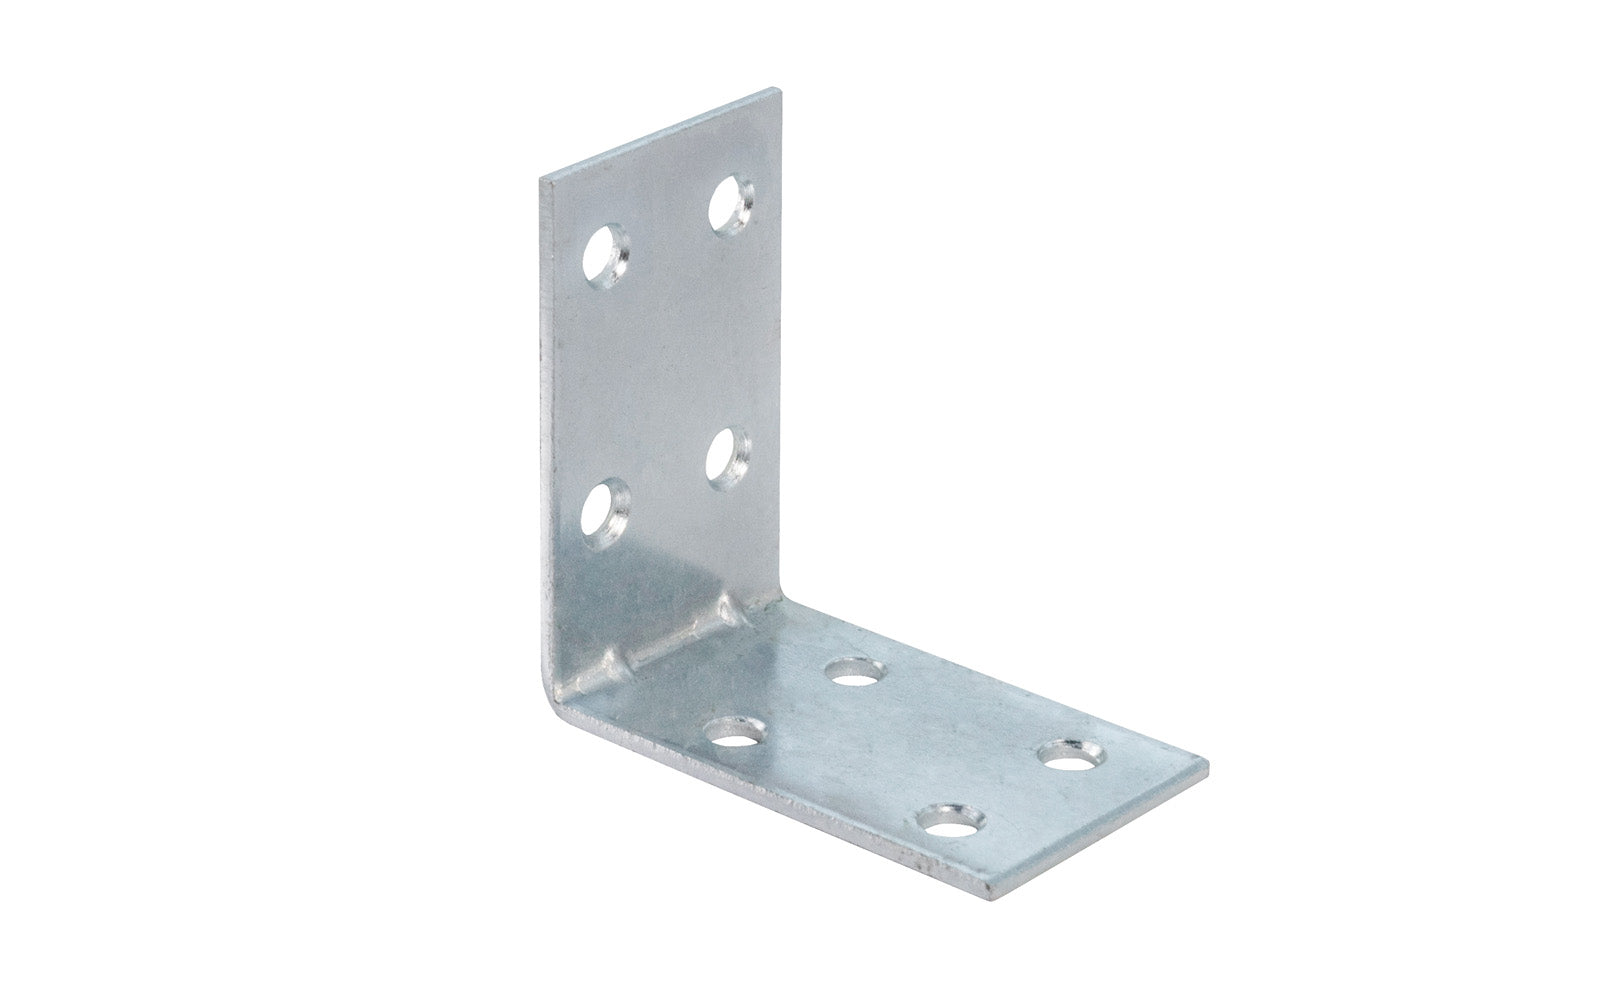 These double width corner braces are designed for furniture, cabinets, shelving support, etc. Allows for quick & easy repair of items in the workshop, home, & other applications. Made of steel material with a zinc plated finish. Available in  1-1/2